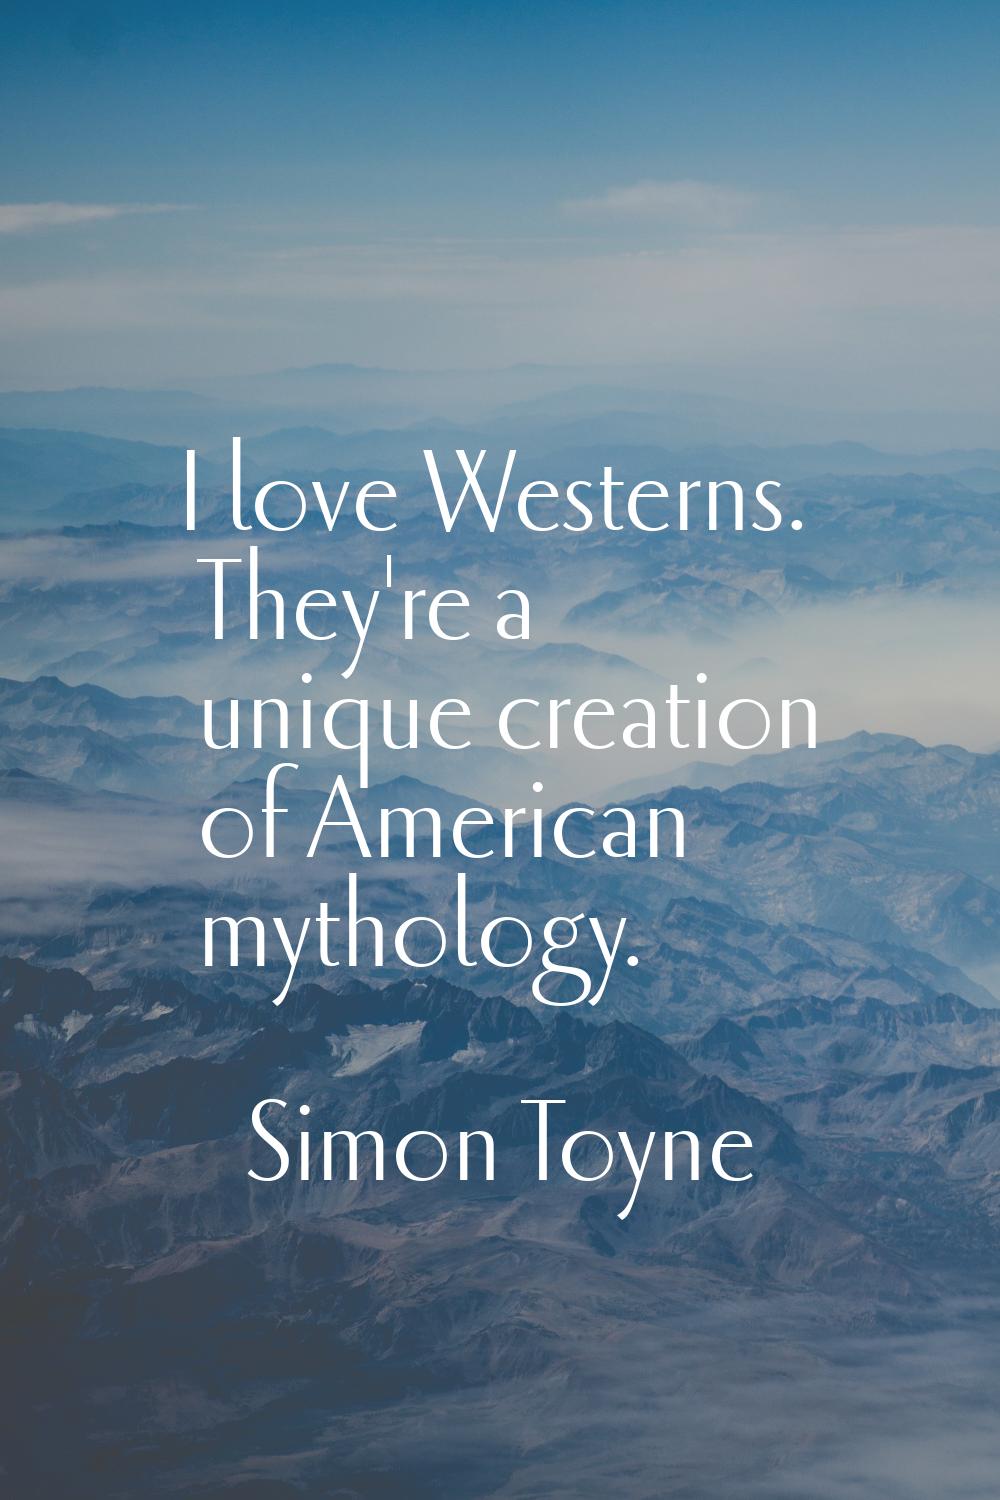 I love Westerns. They're a unique creation of American mythology.